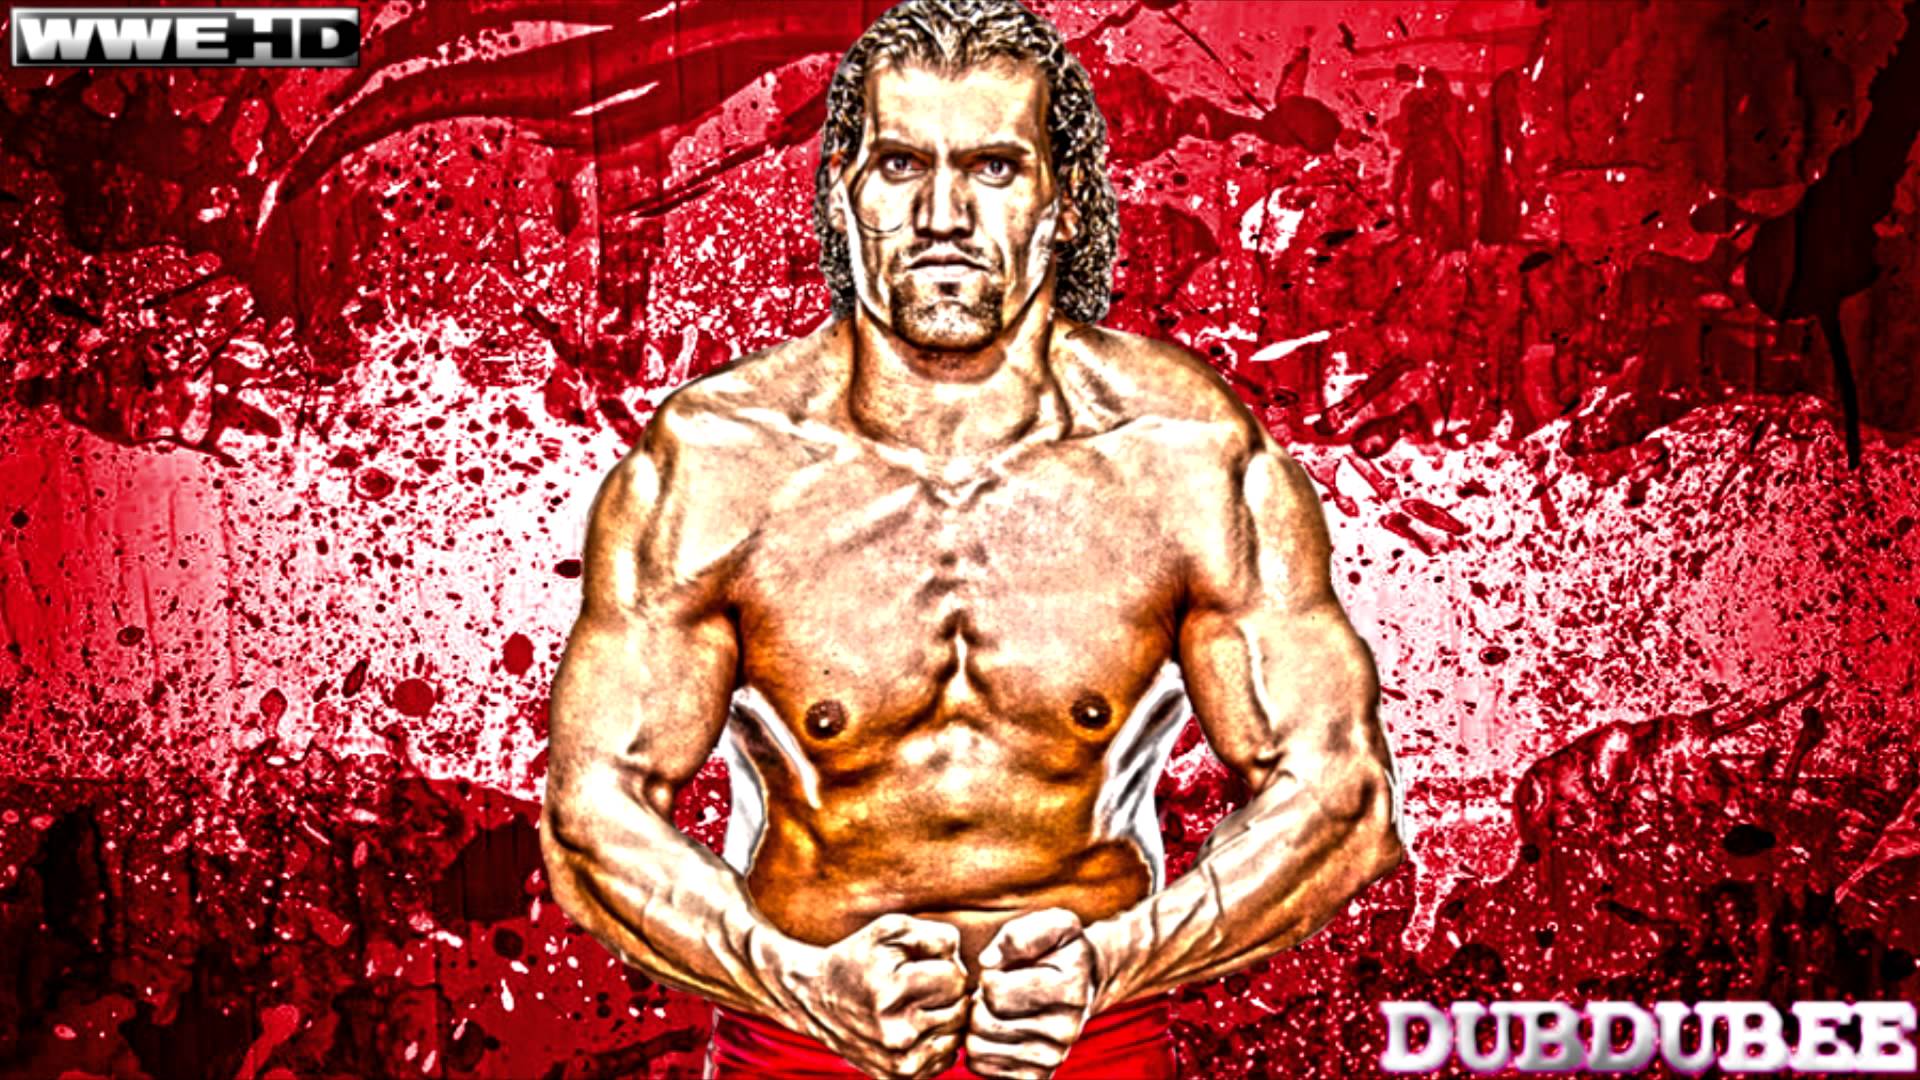 WWE: 3rd The Great Khali Theme Song "Land of Five Rivers" 2012